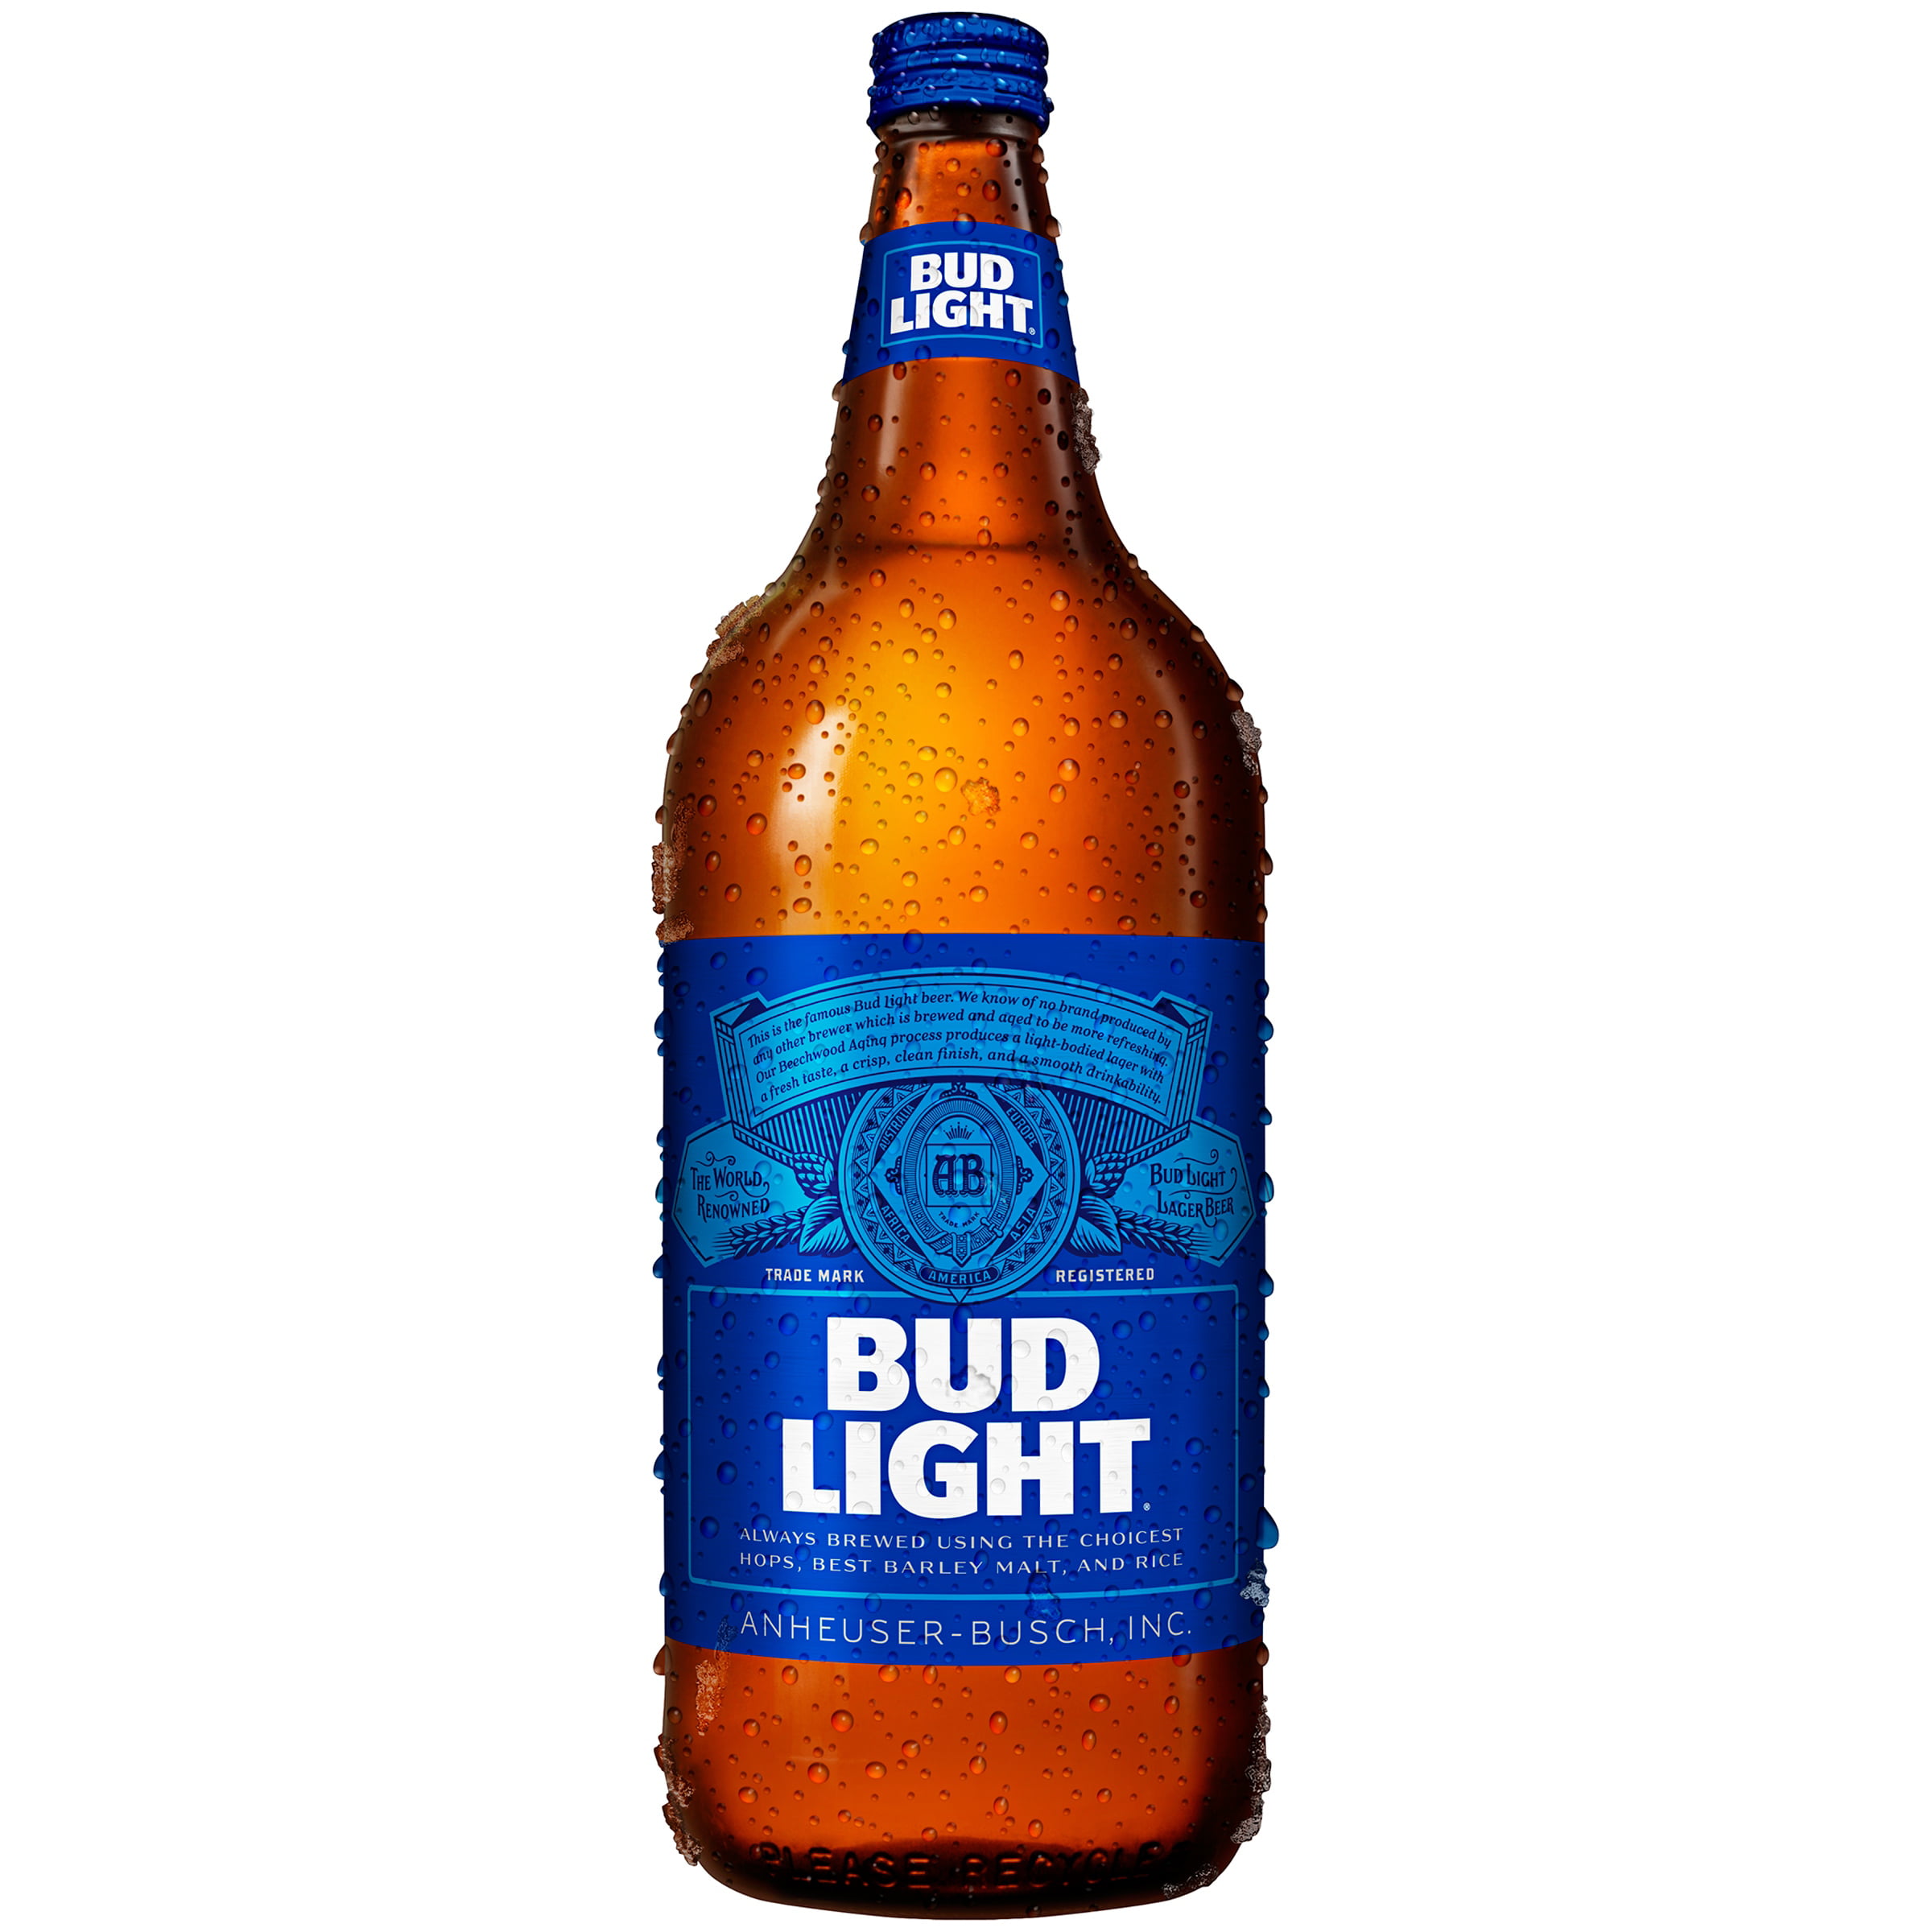 How Many Calories In A 12 Ounce Can Of Bud Light Beer ...